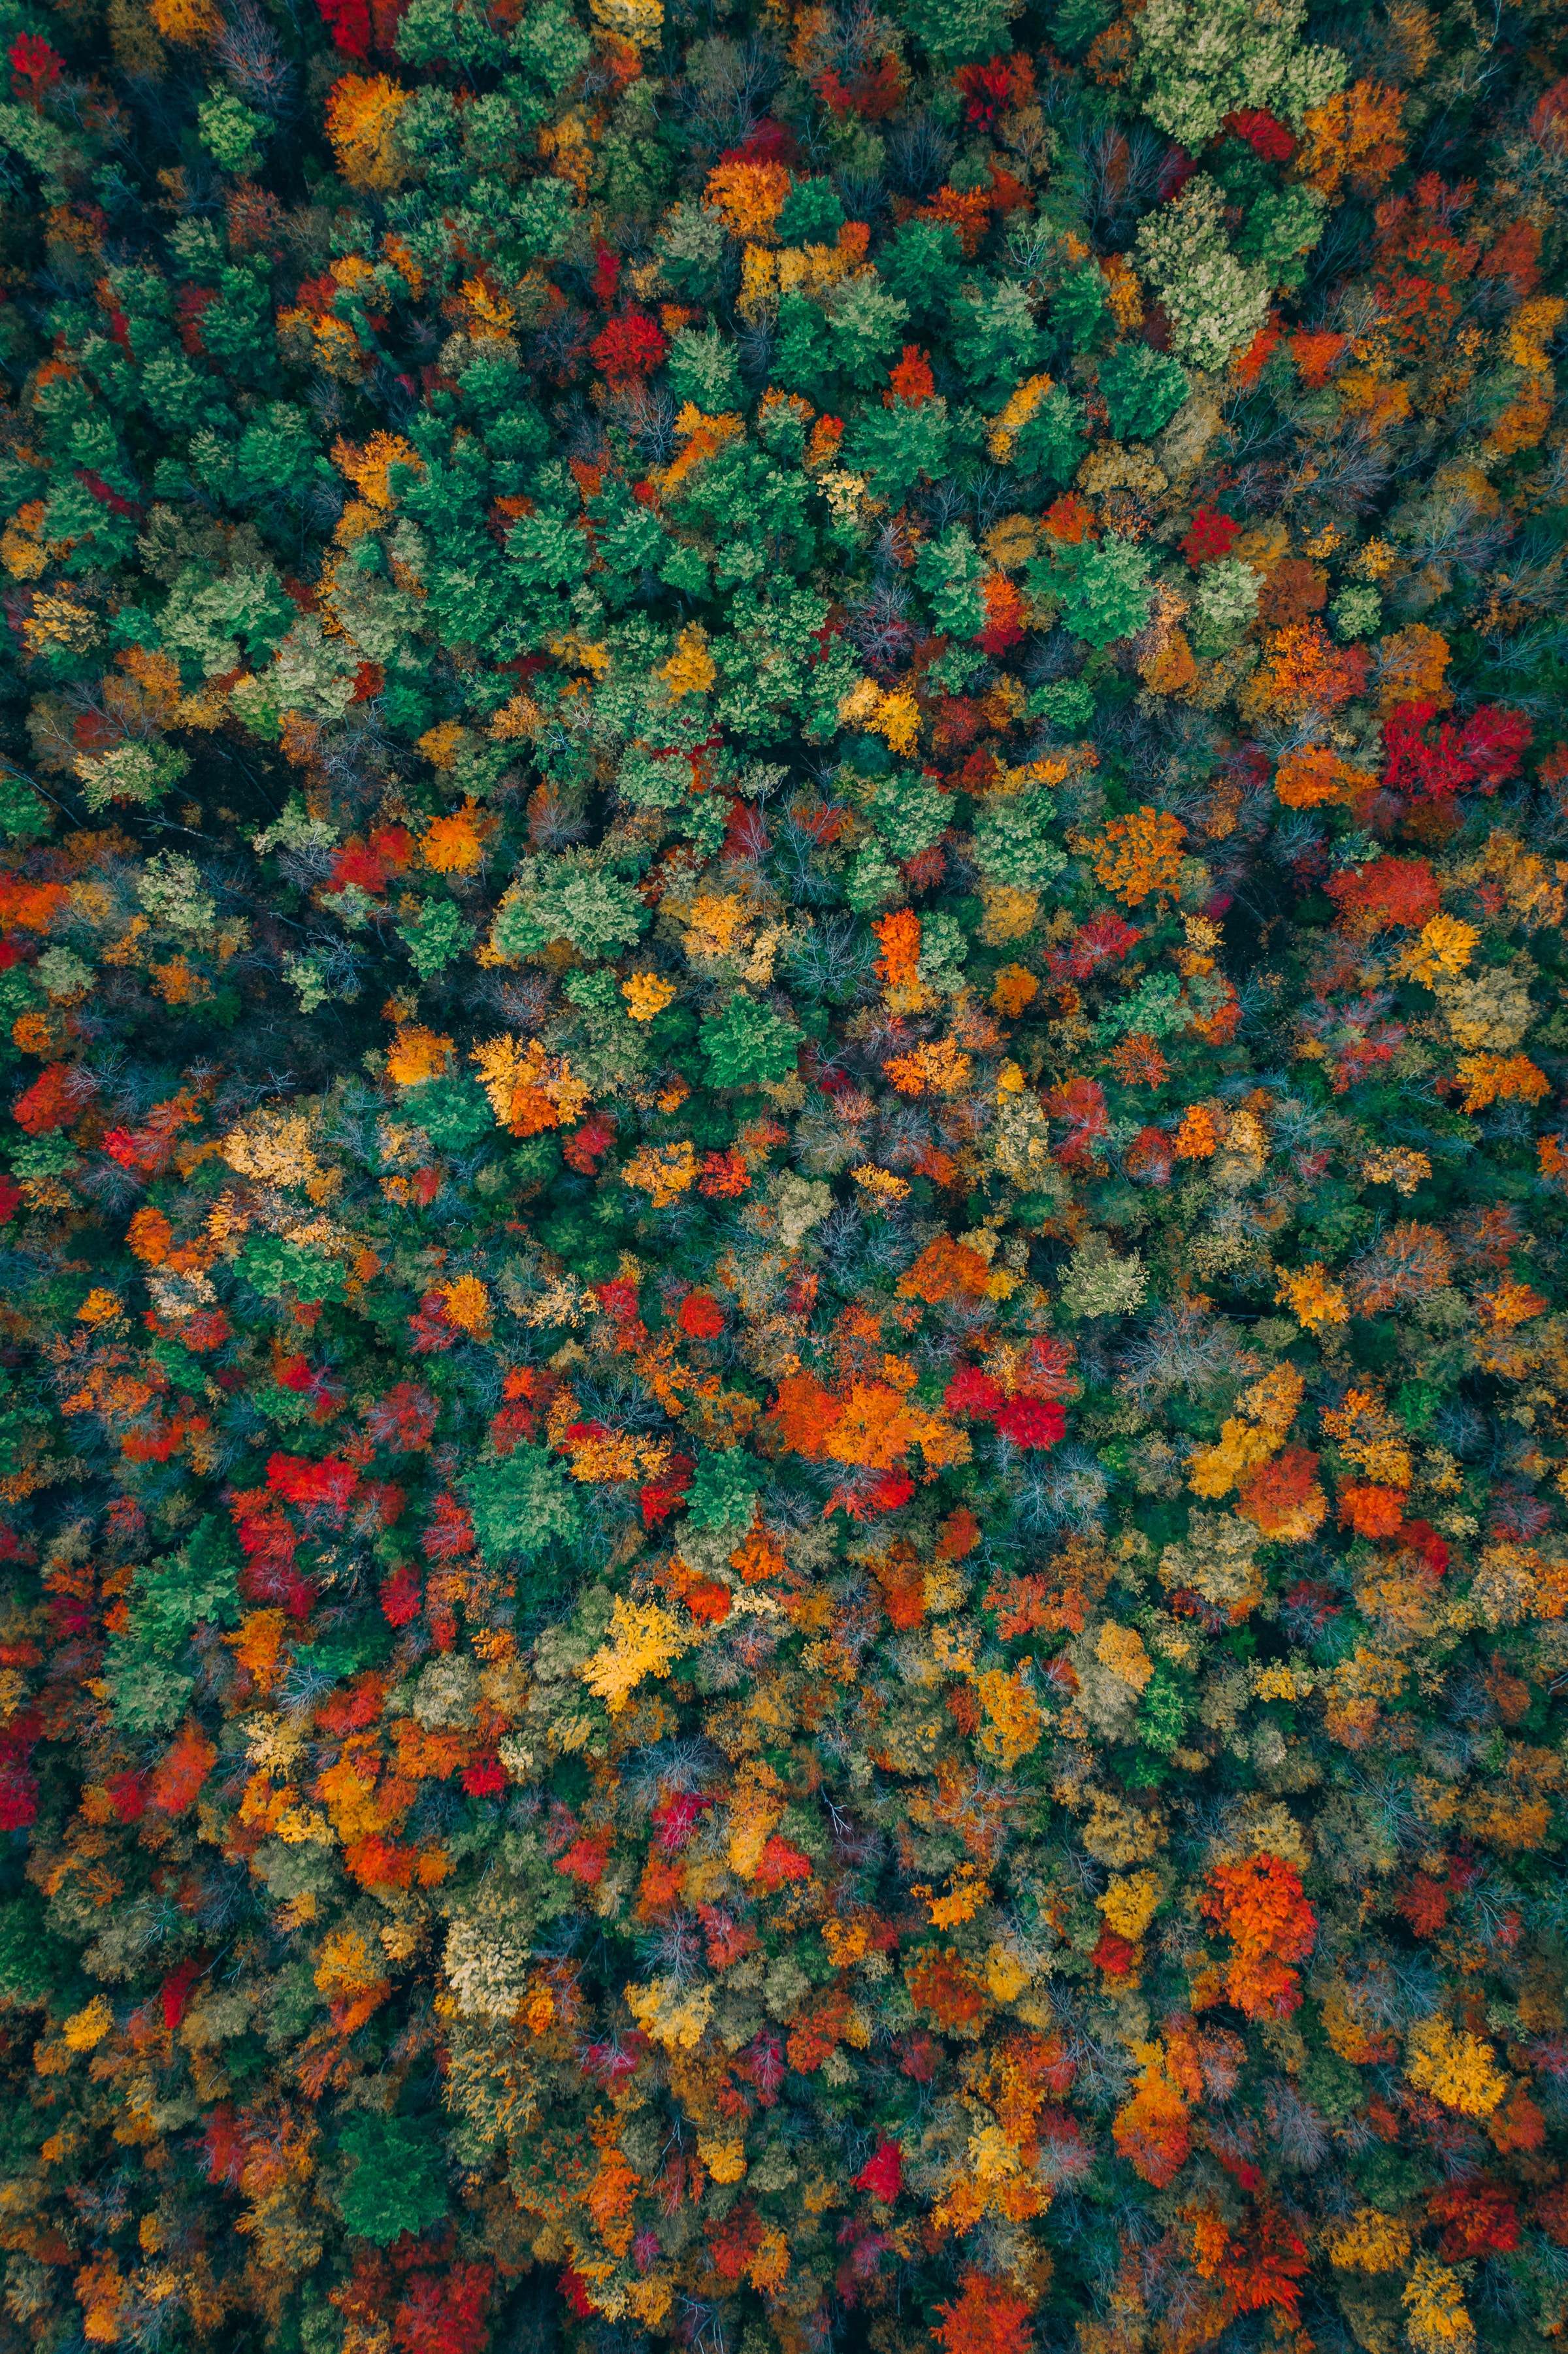 HD wallpaper view from above, multicolored, motley, autumn, nature, trees, forest